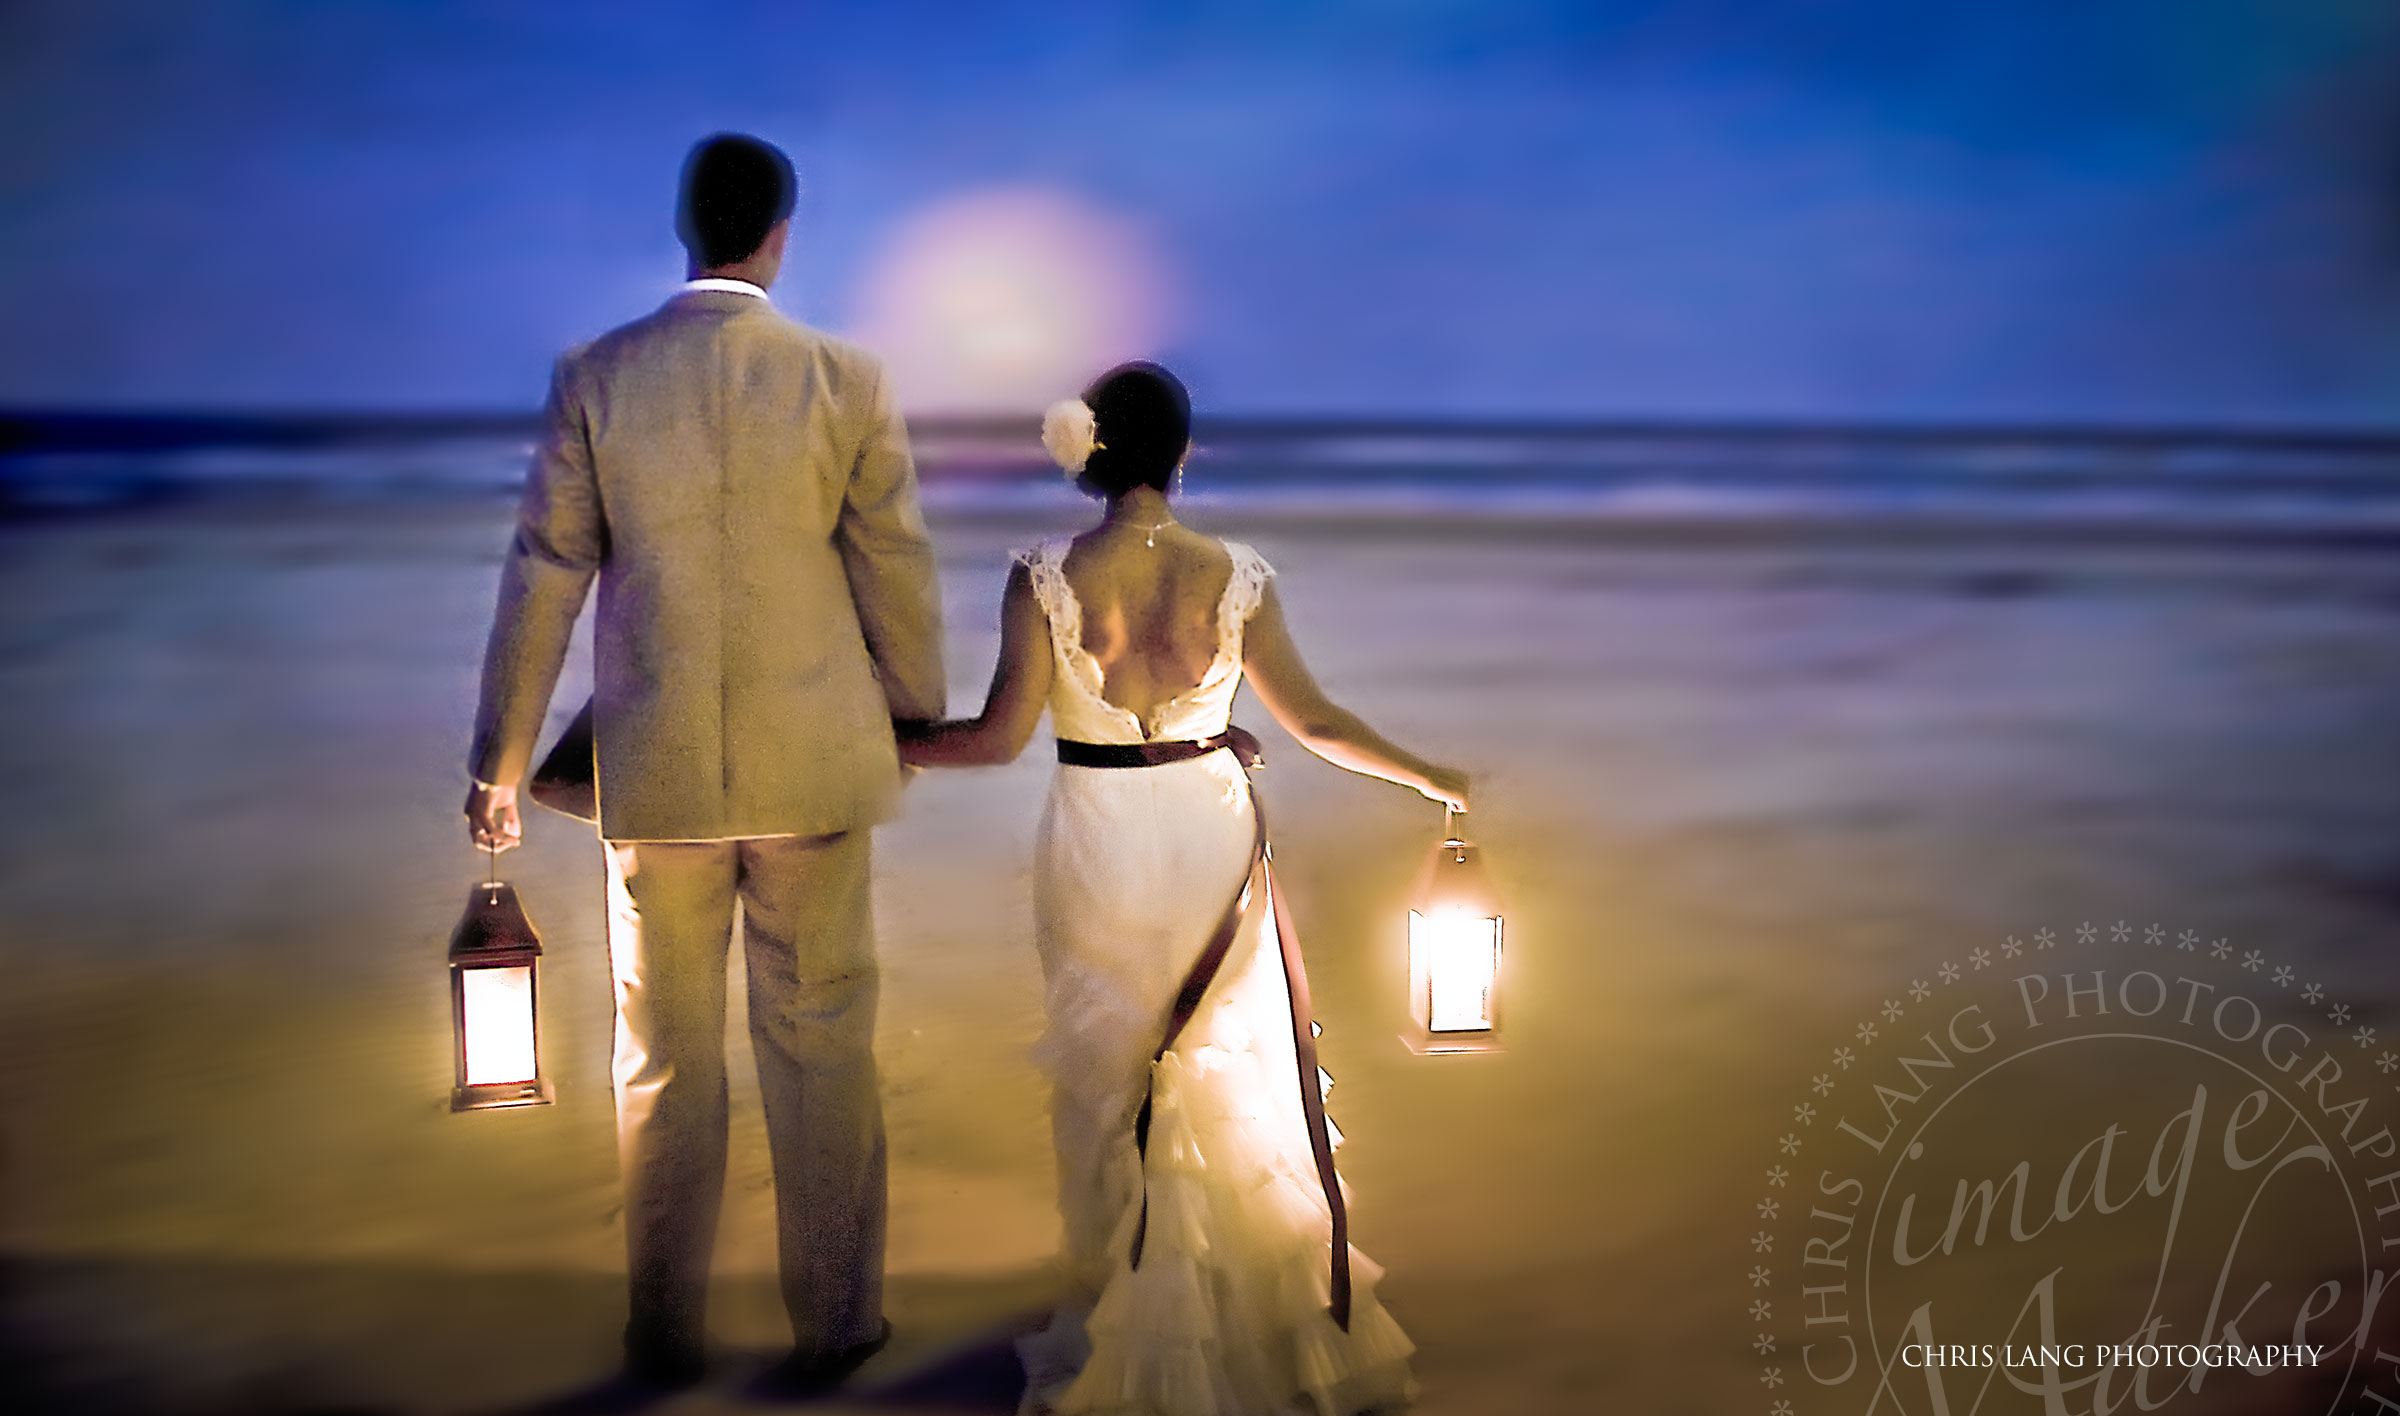 Creative wedding picture of bride and groom holding lanterns on the beach. Wilmington NC Photographer